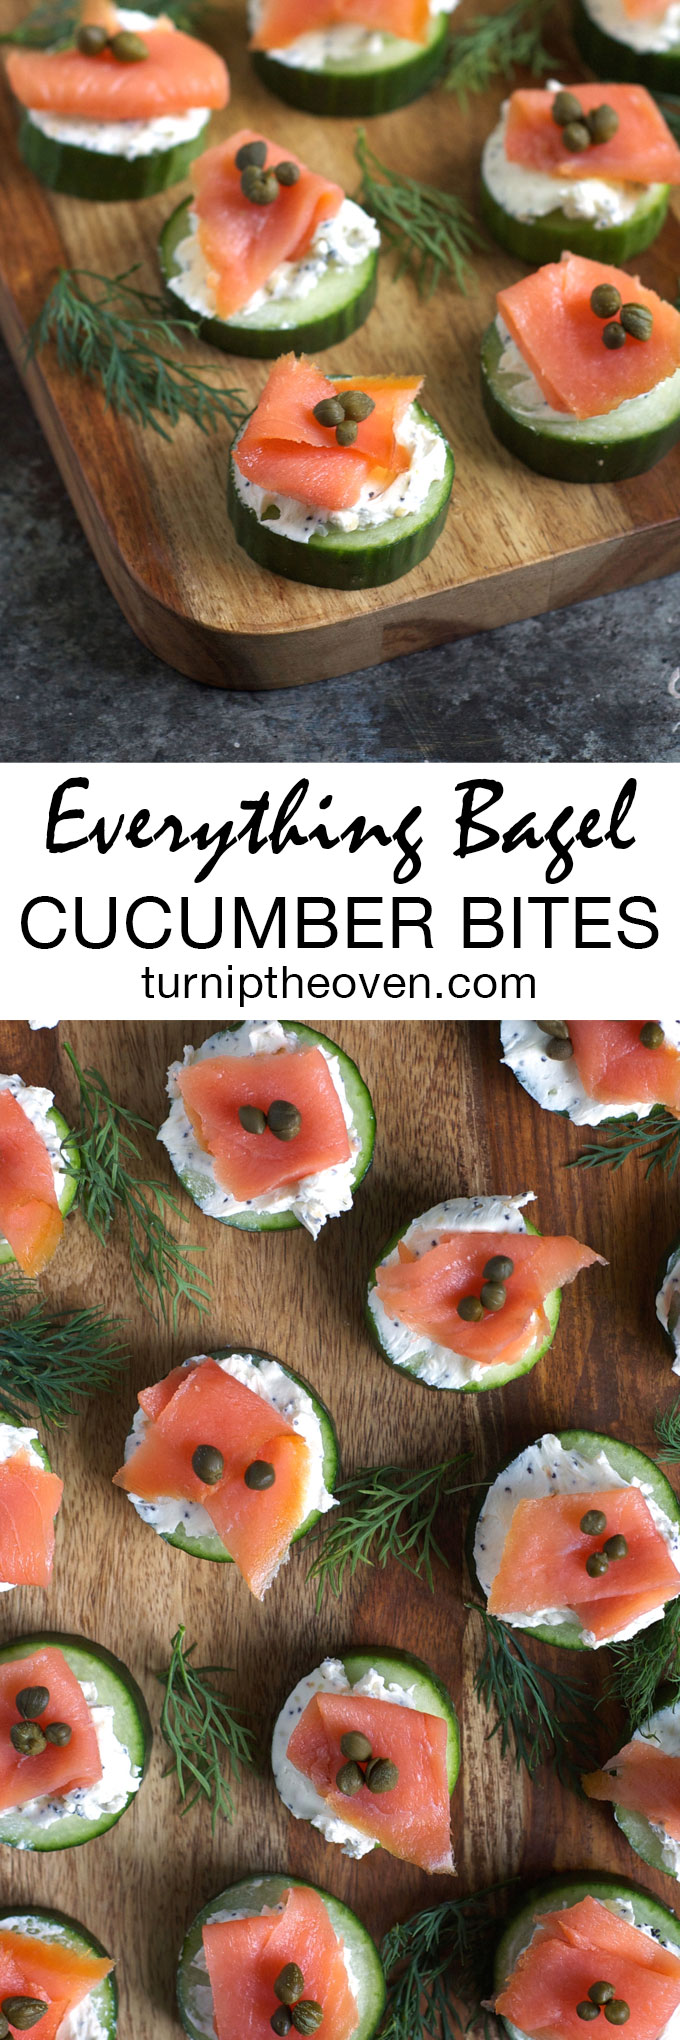 These easy, healthy, and gluten-free cucumber bites are topped with everything bagel-flavored cream cheese and smoked salmon. They just might be the perfect party appetizer!